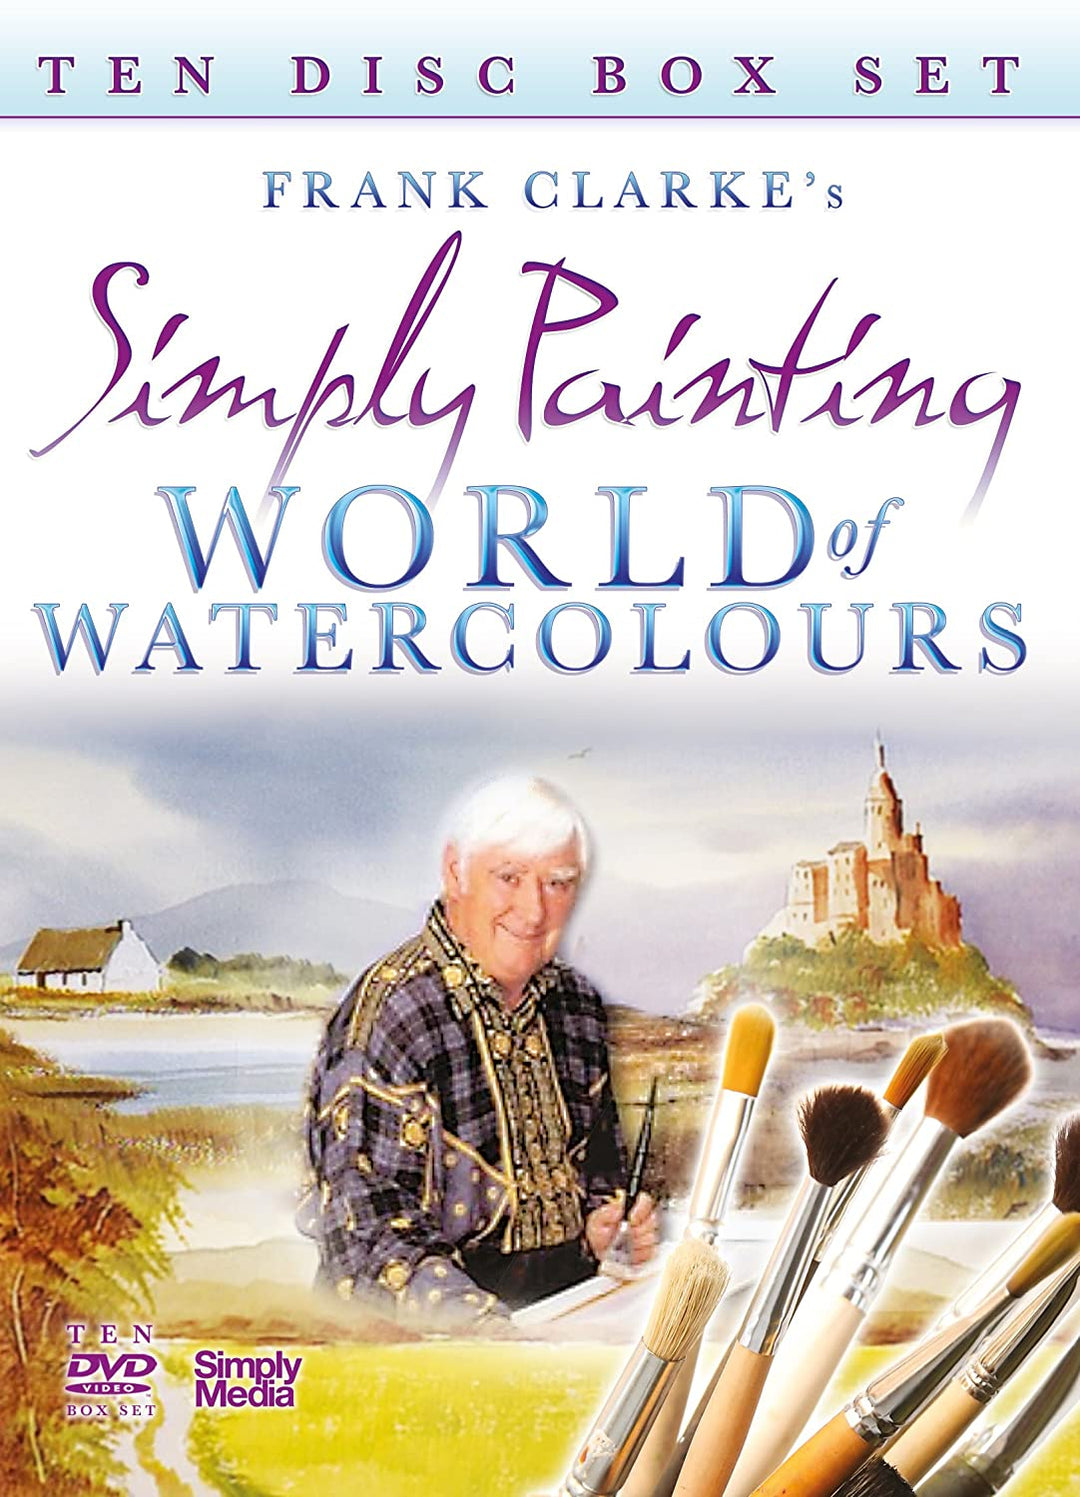 Frank Clarke - Simply Painting - World Of Watercolours - The Complete Collection [DVD]